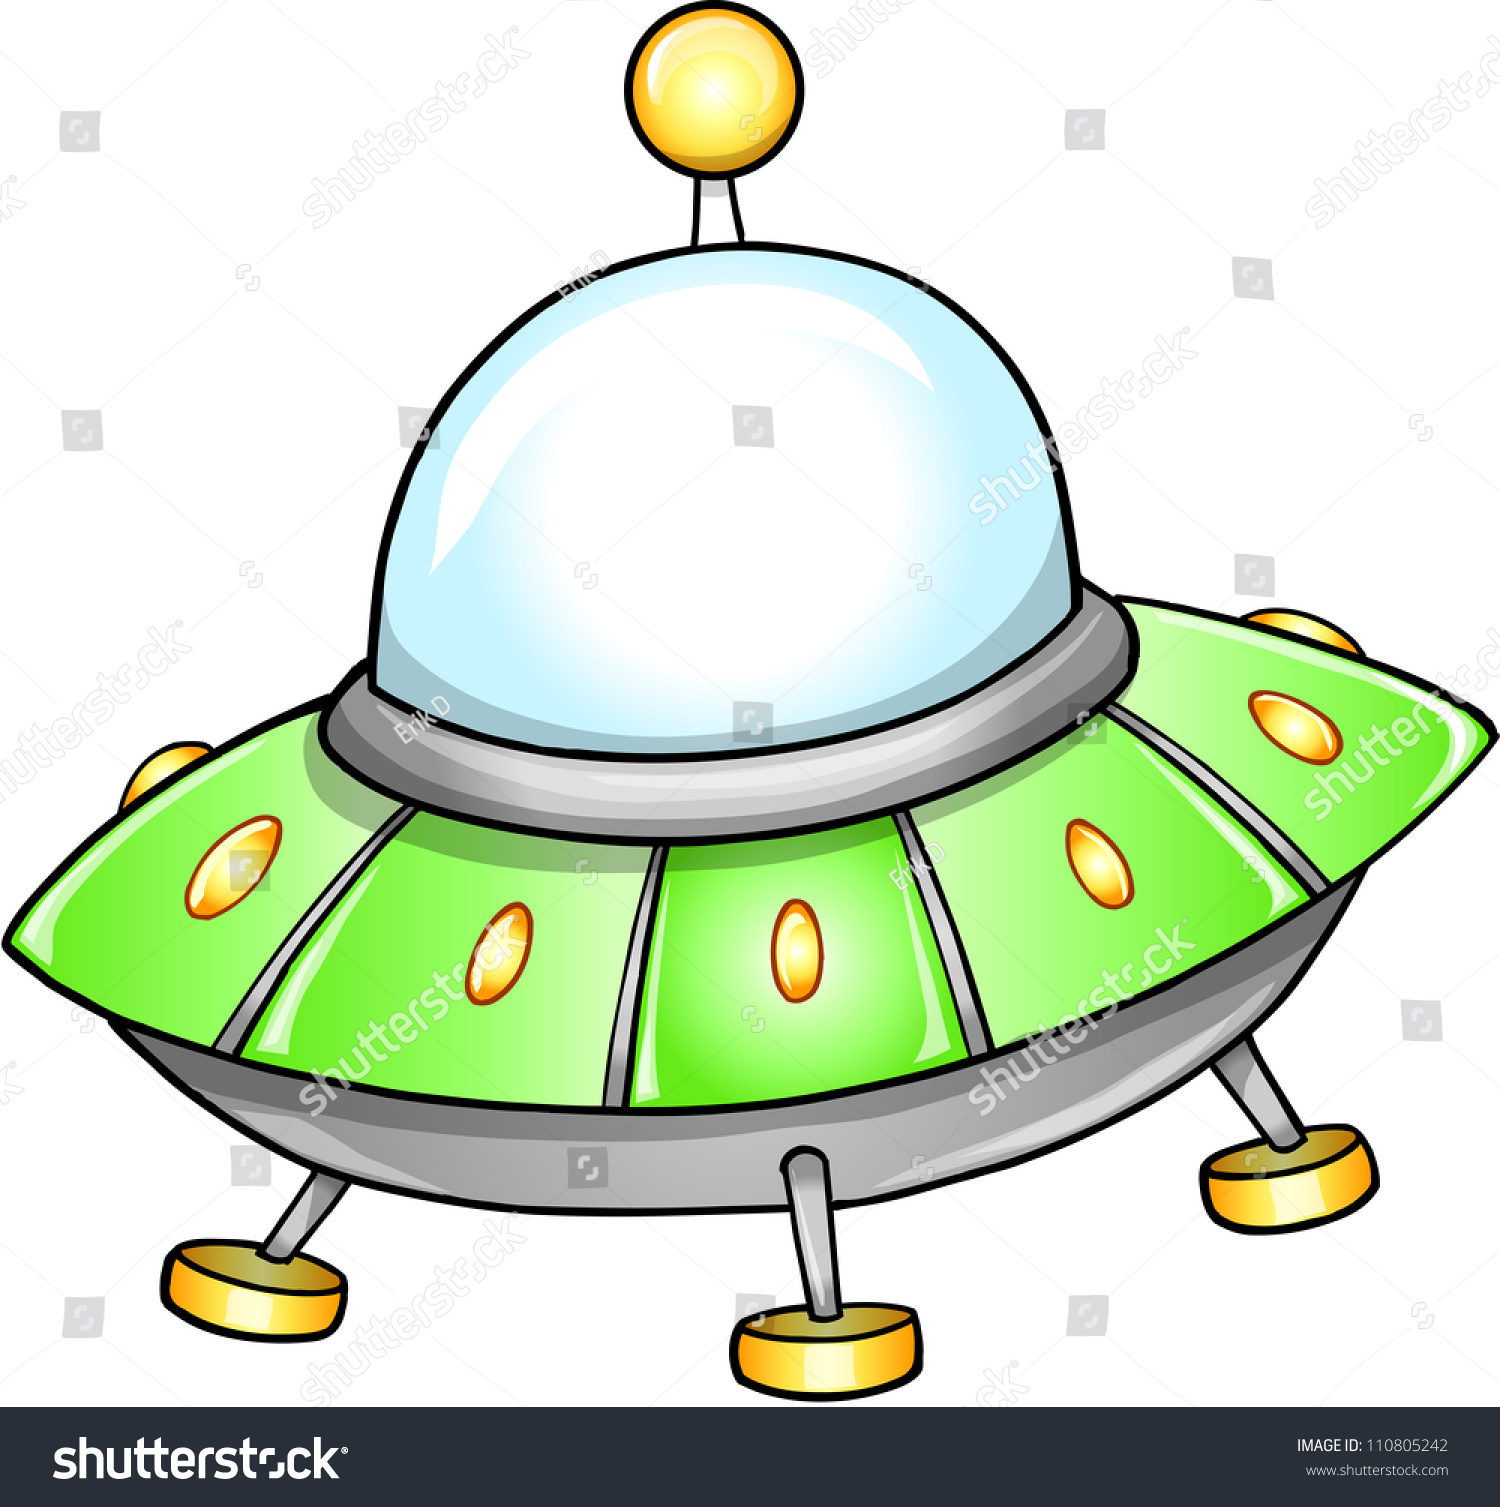 clipart flying saucer - photo #23